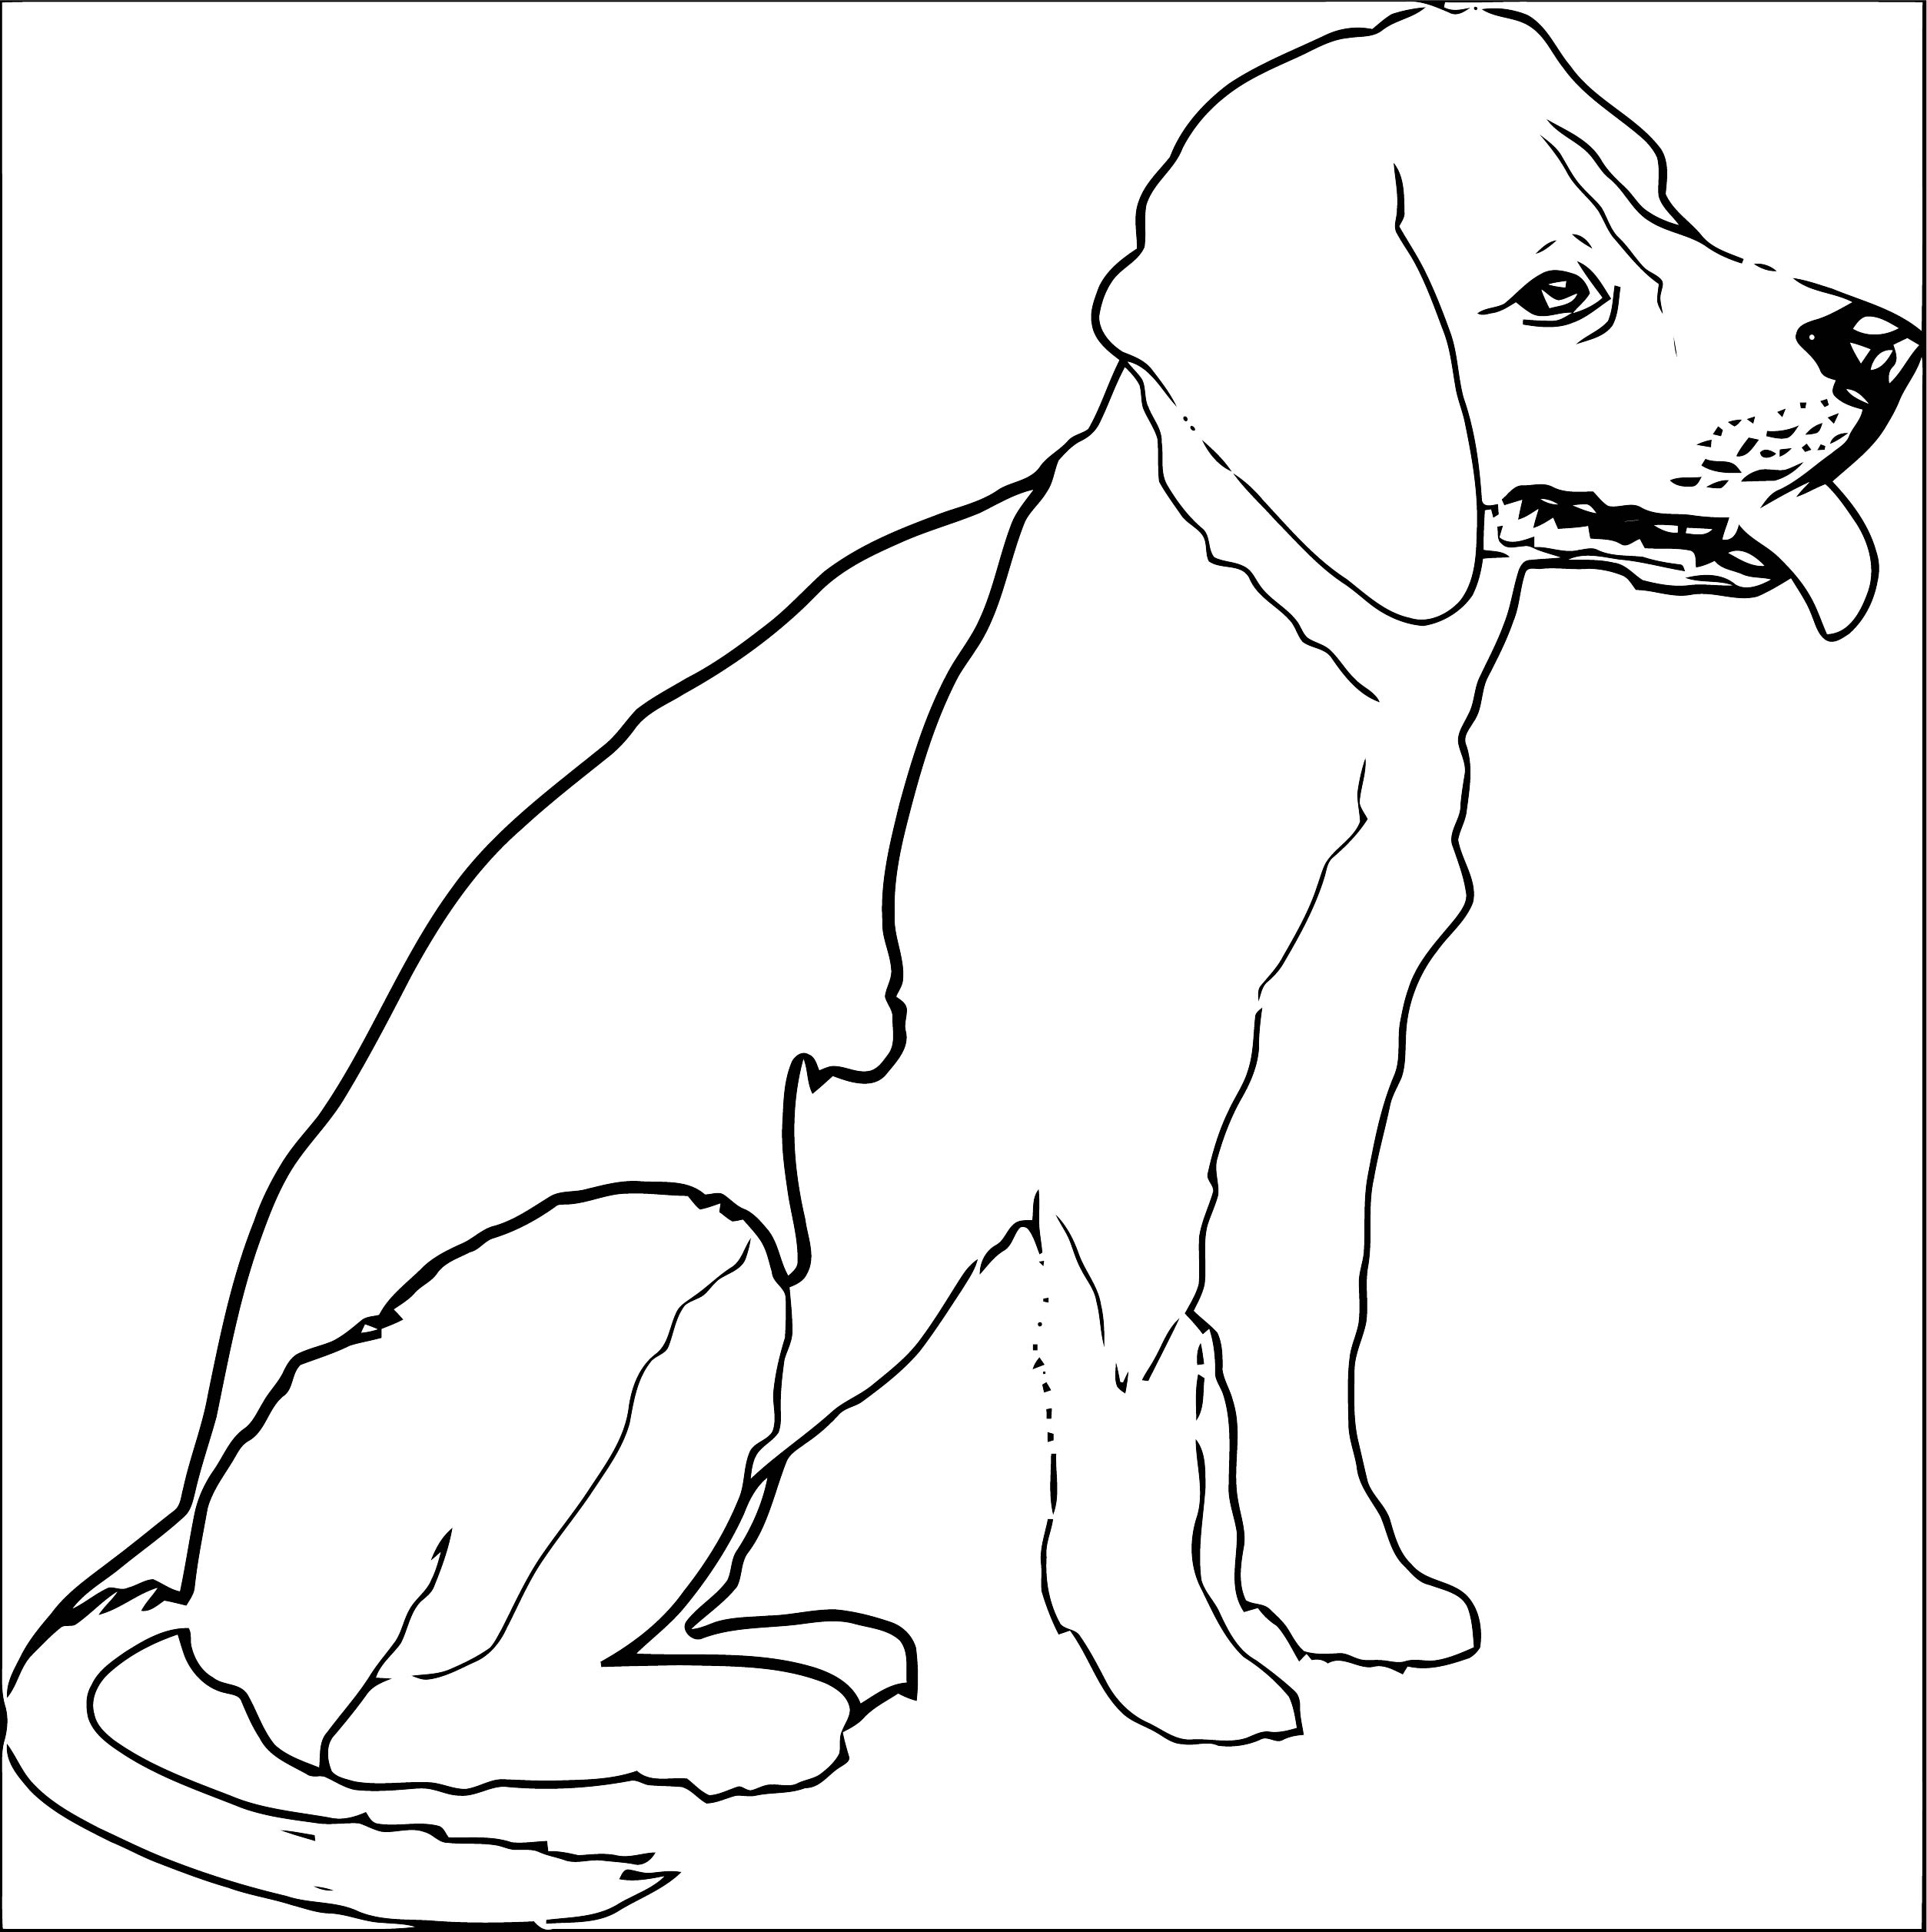 Realistic Outline Puppy Dog Coloring Page [Converted]